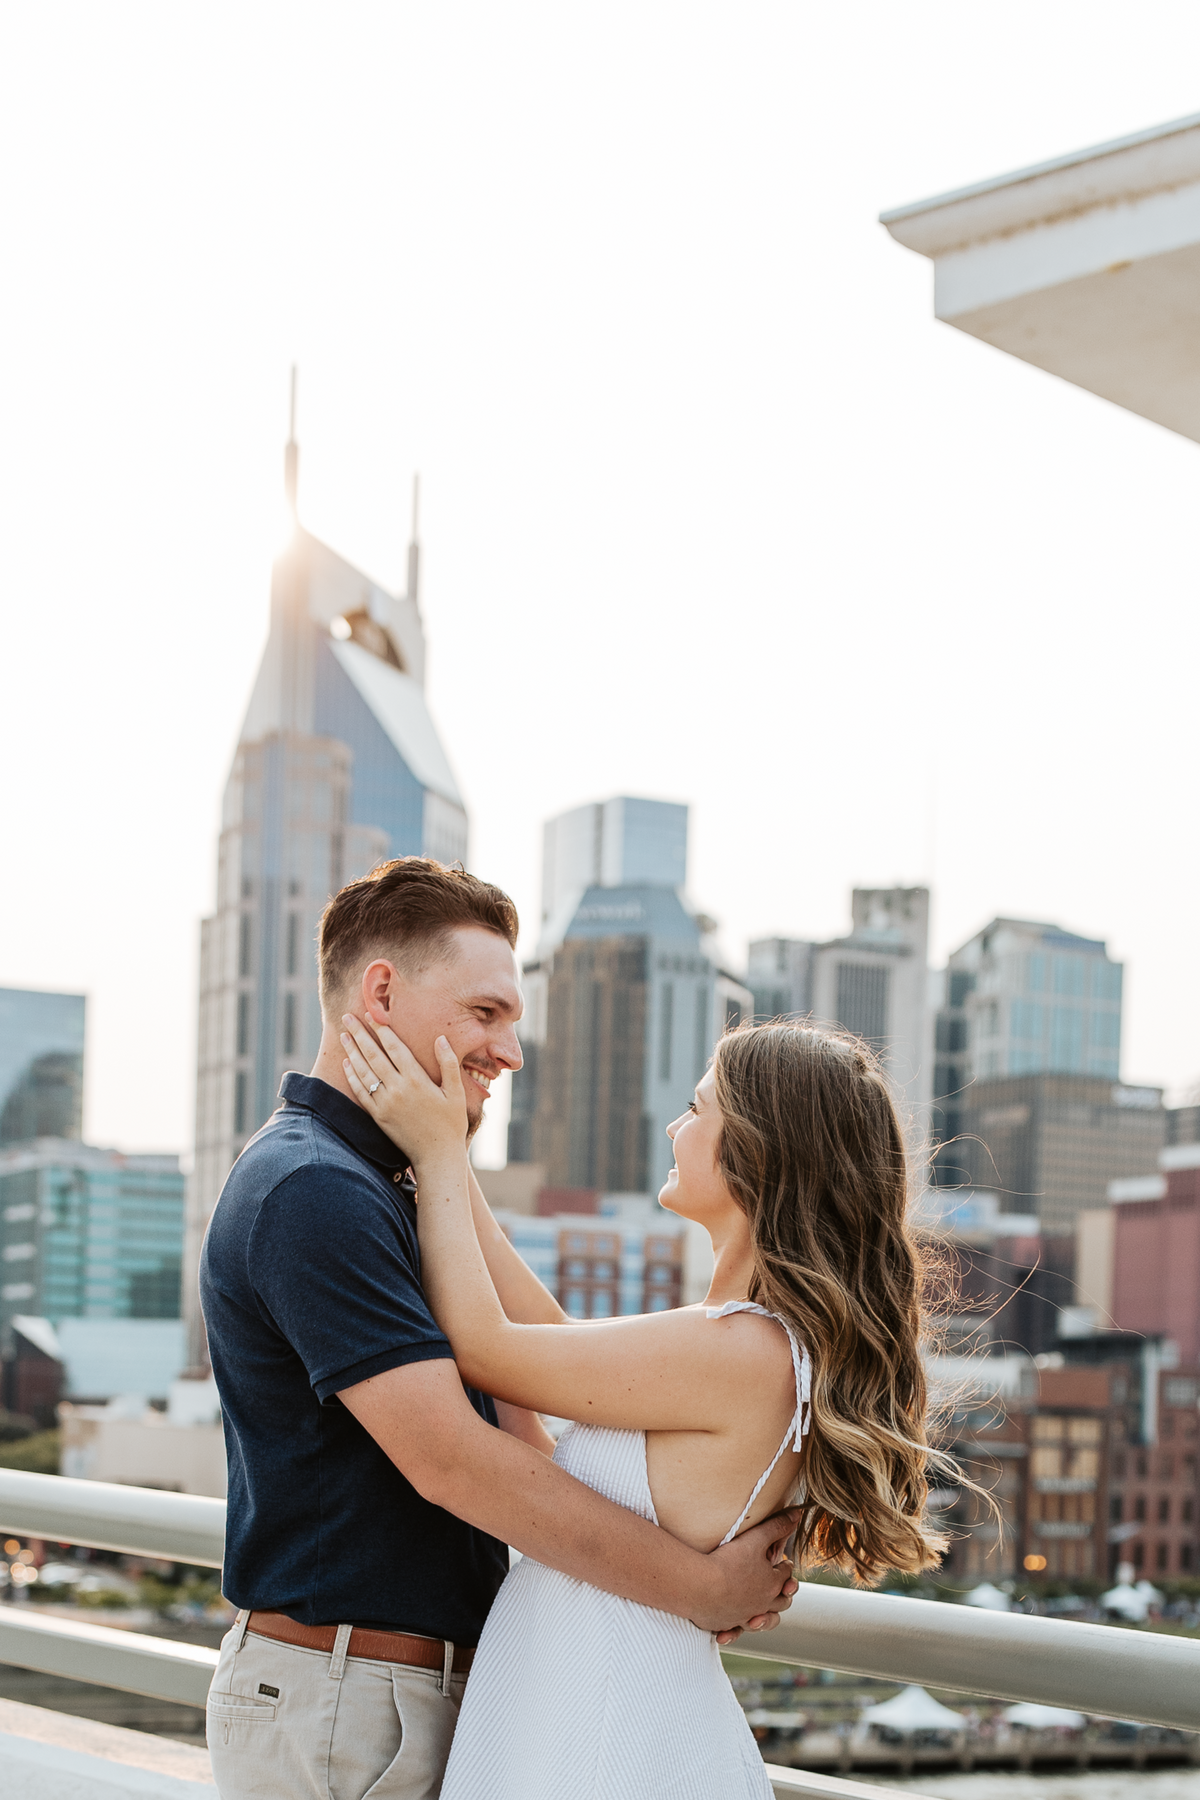 Nashville Pedestrian Bridge and Centenniel Park Engagement Session | Nashville, TN | Carly Crawford Photography | Knoxville and Tennessee Wedding, Couples, and Portrait Photographer-287006